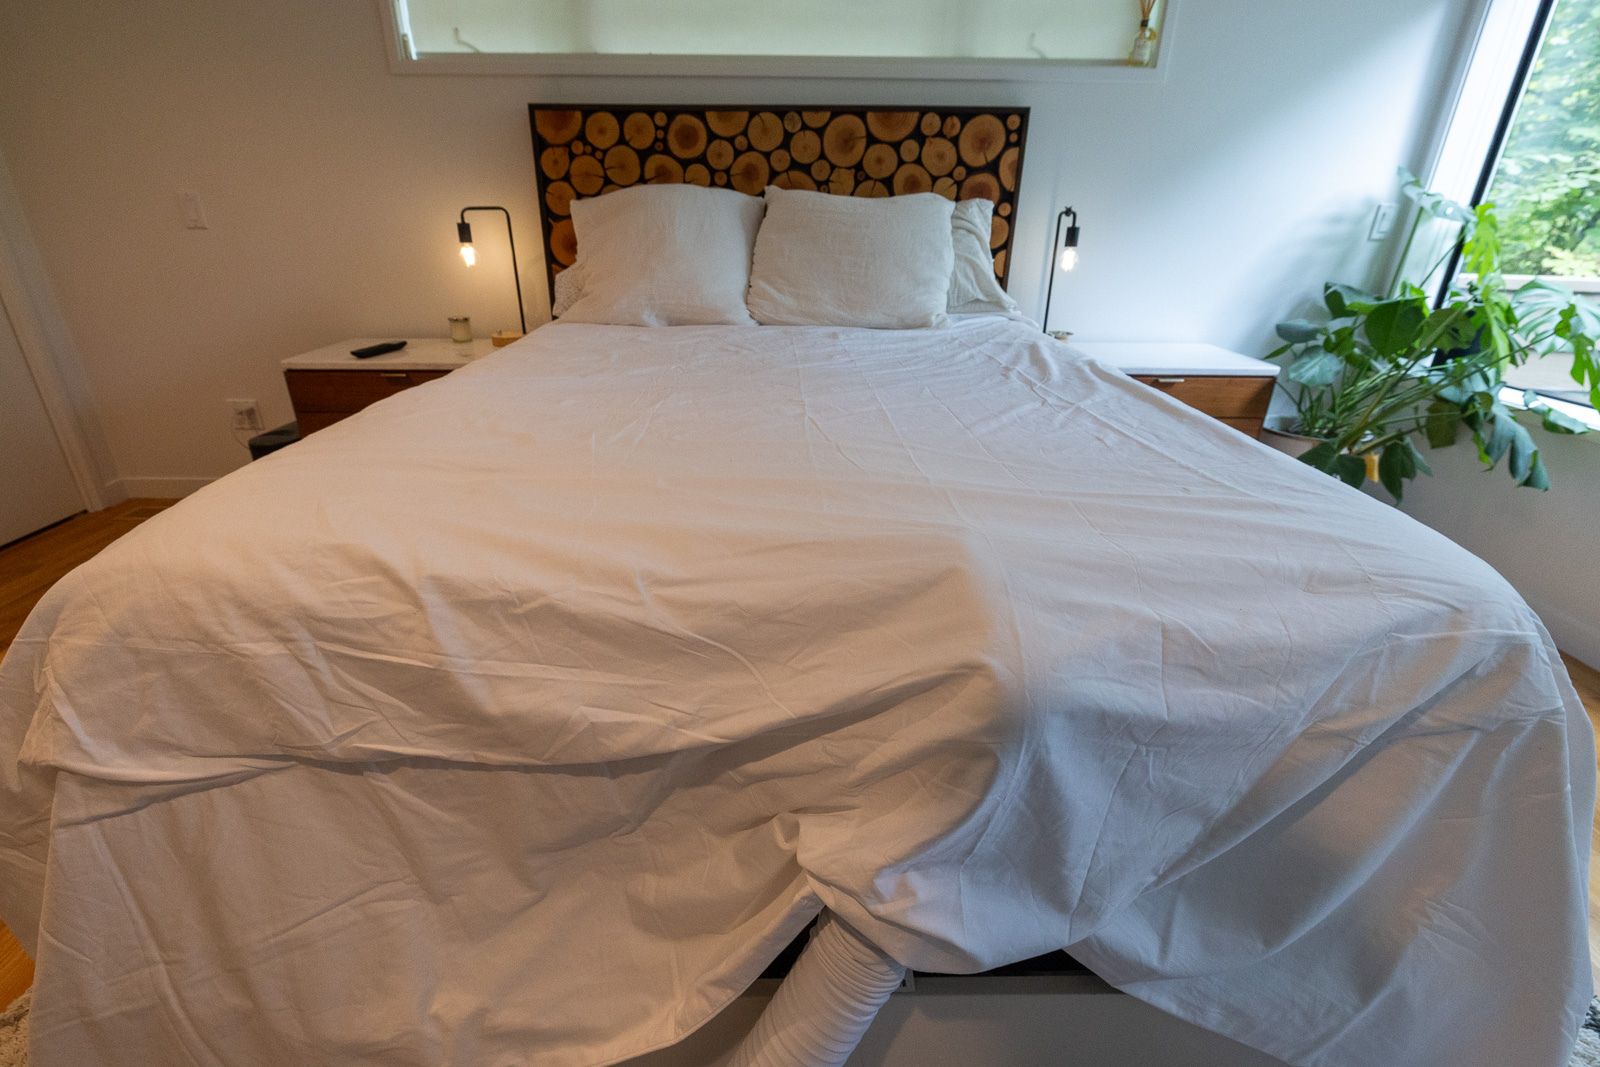 BedJet Cooling Sheets & Heated Comforter in One